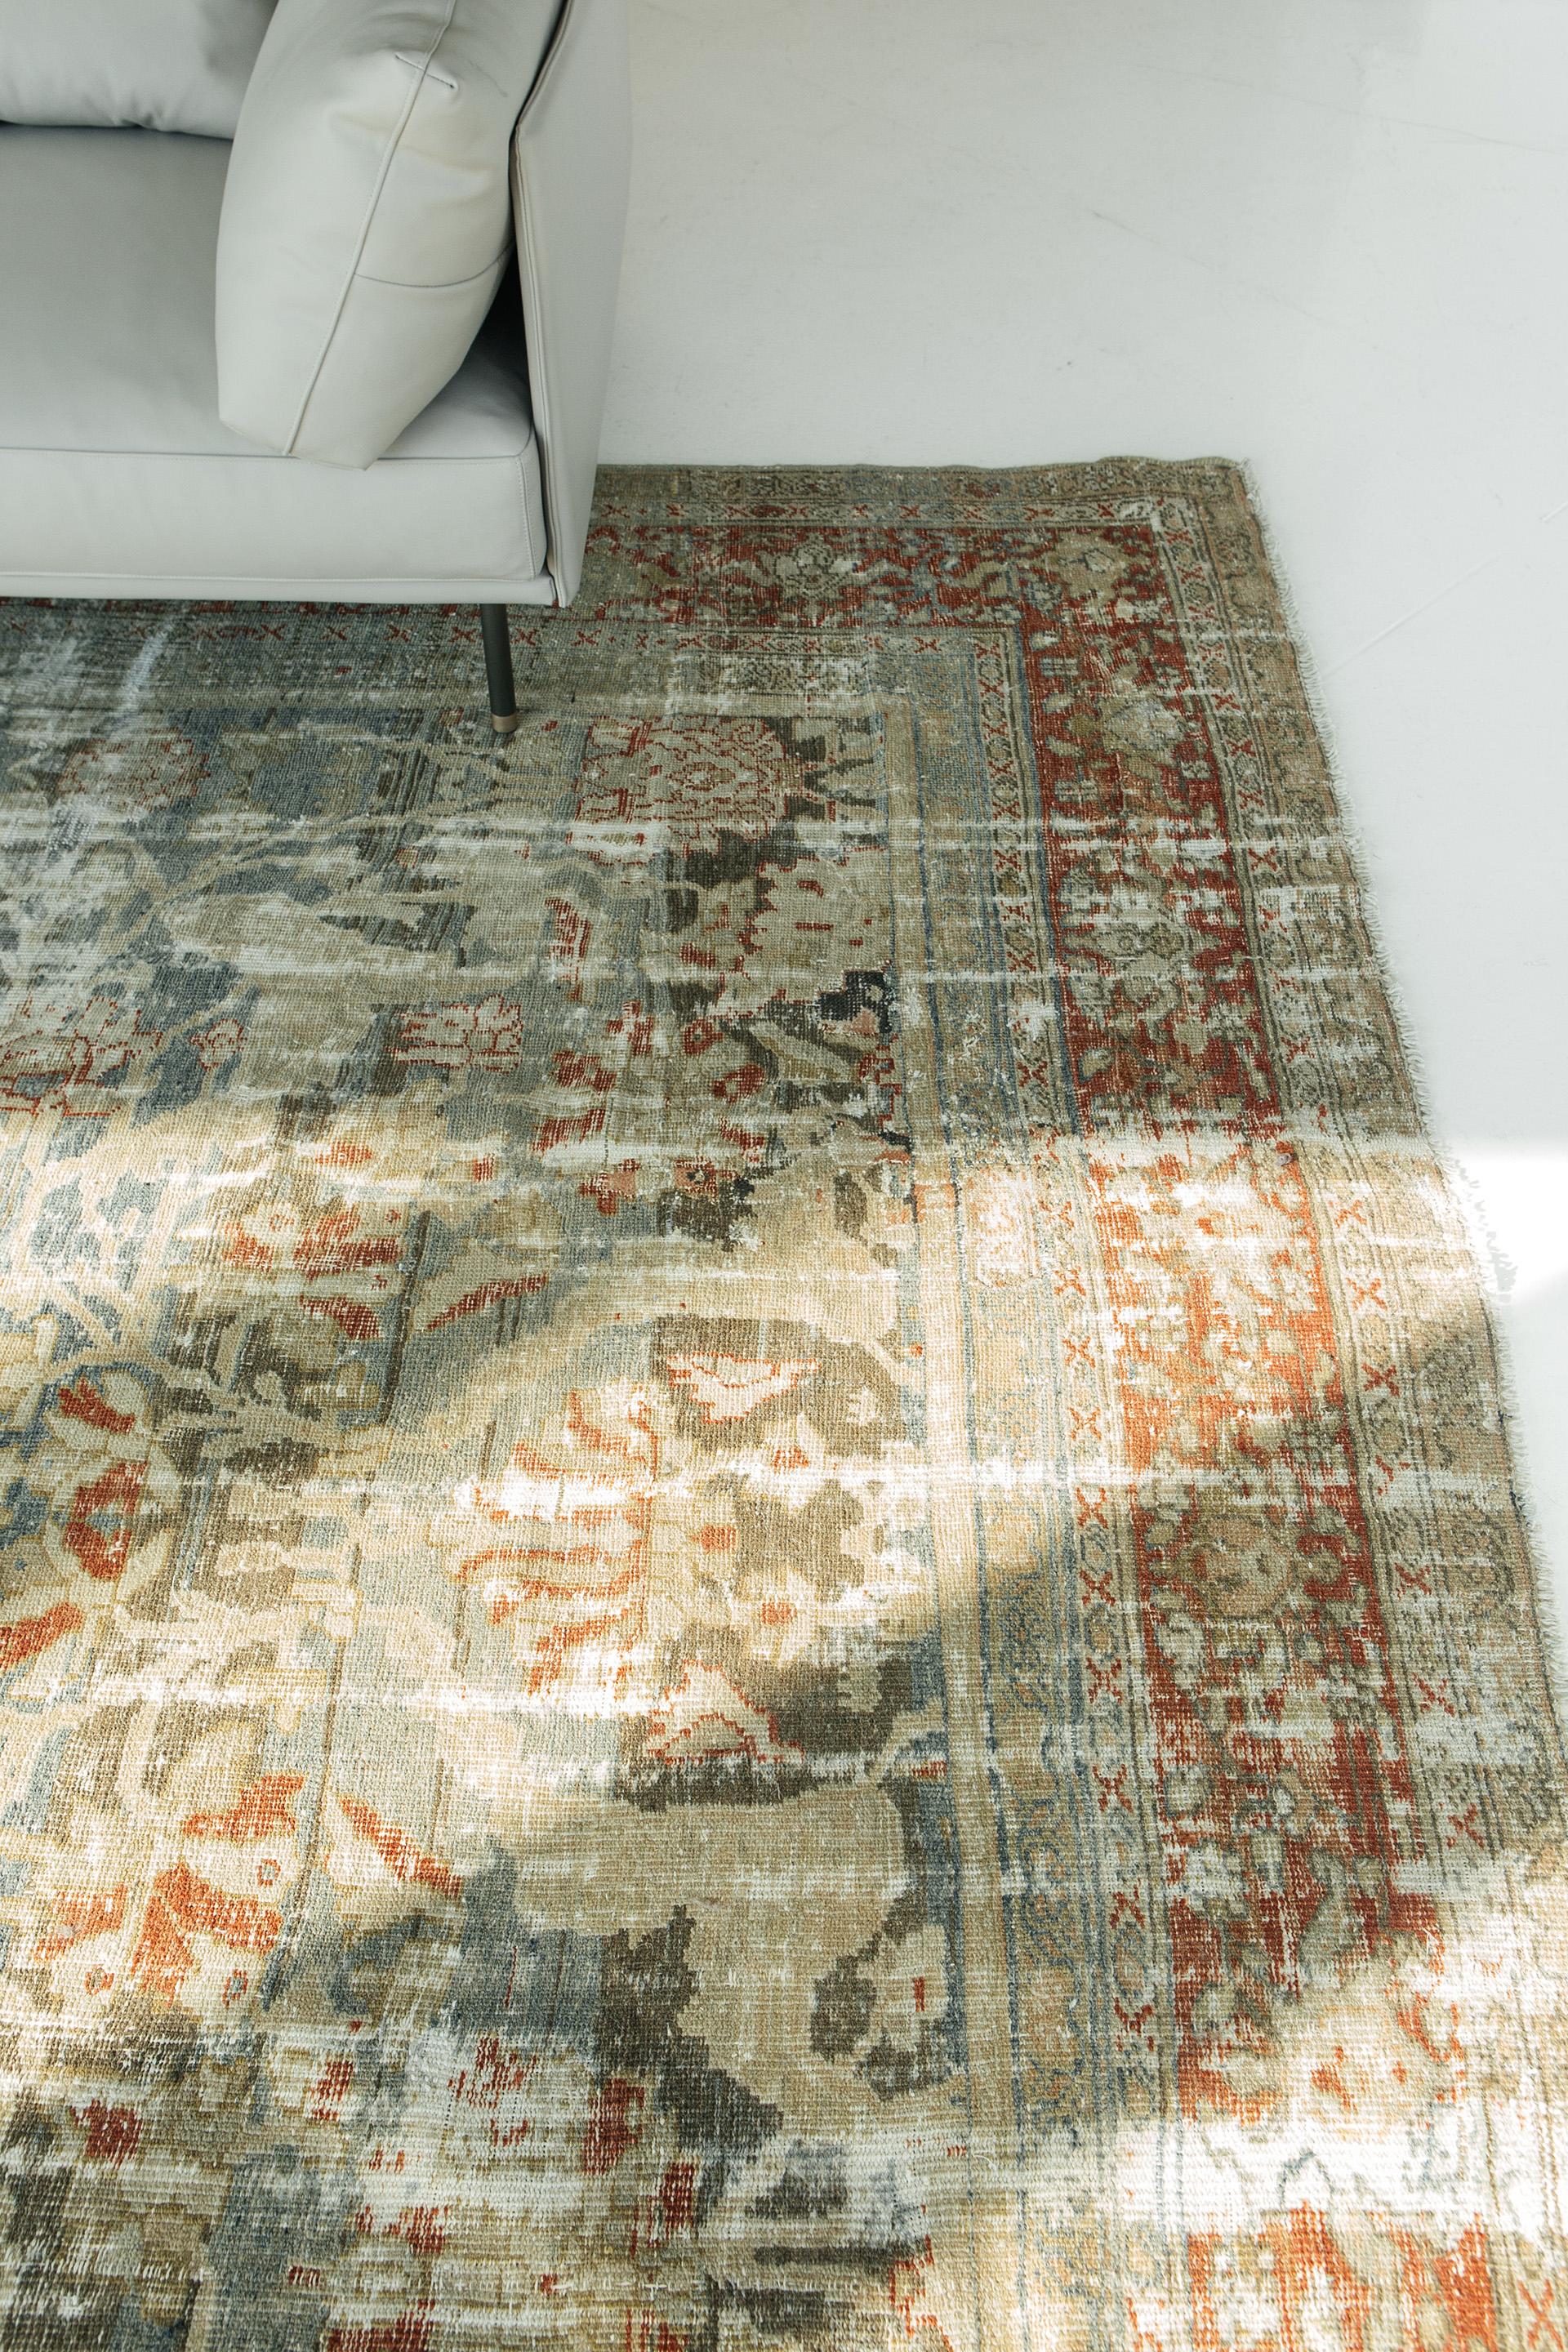 This distressed antique Sultanabad features taupe and varied indigo ground tones, with a barn-red main border and detailing, and tan and ivory accents throughout. The distribution of wabi-sabi distressing creates a pleasing contrast to the rug’s